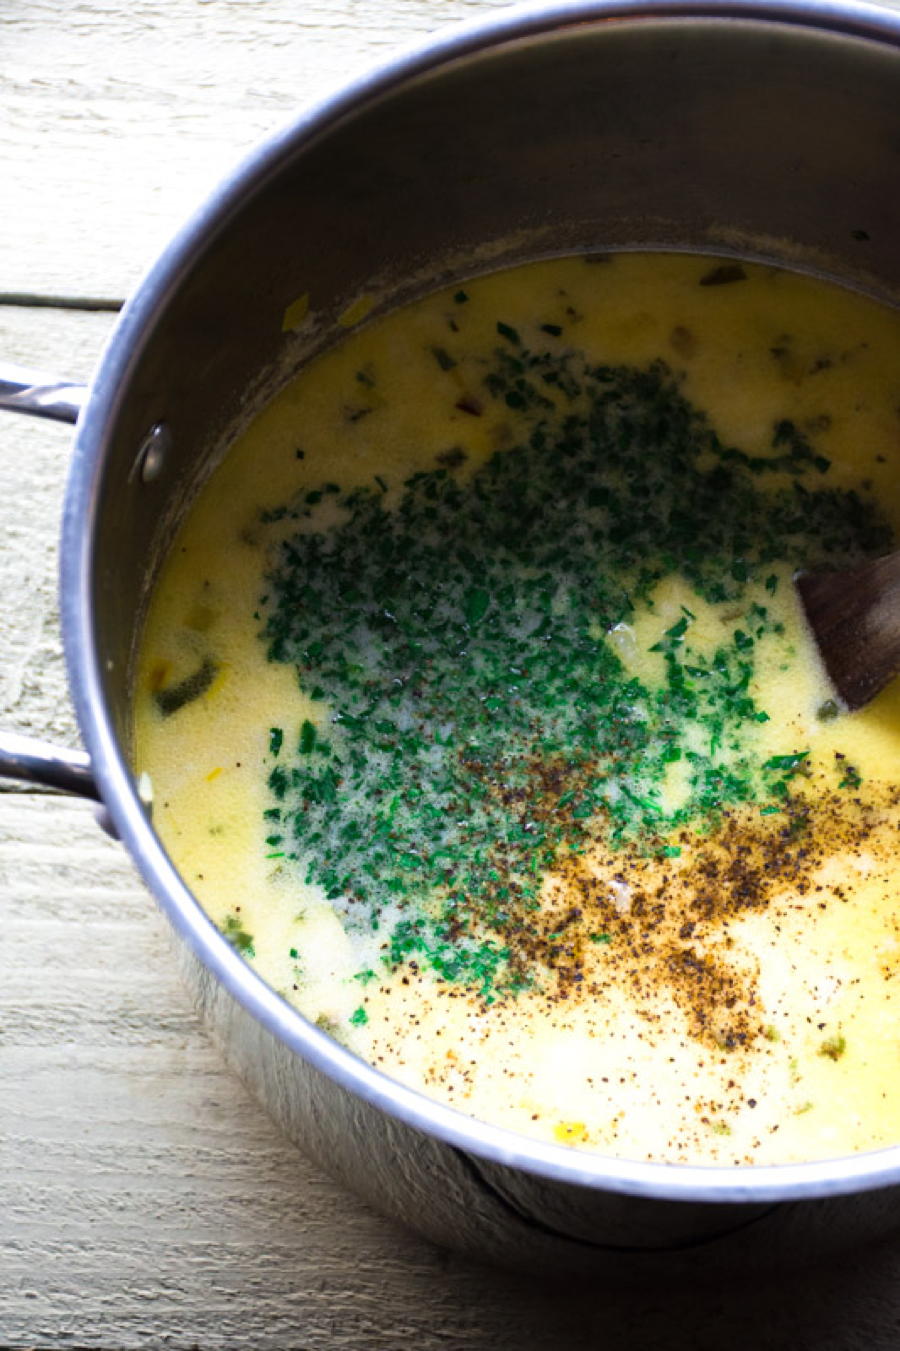 a quick and simple recipe for creamy potato soup with parsley, leeks and fennel. easy to make and a perfect way to warm up on a cold winter's night! | www.nyssaskitchen.com